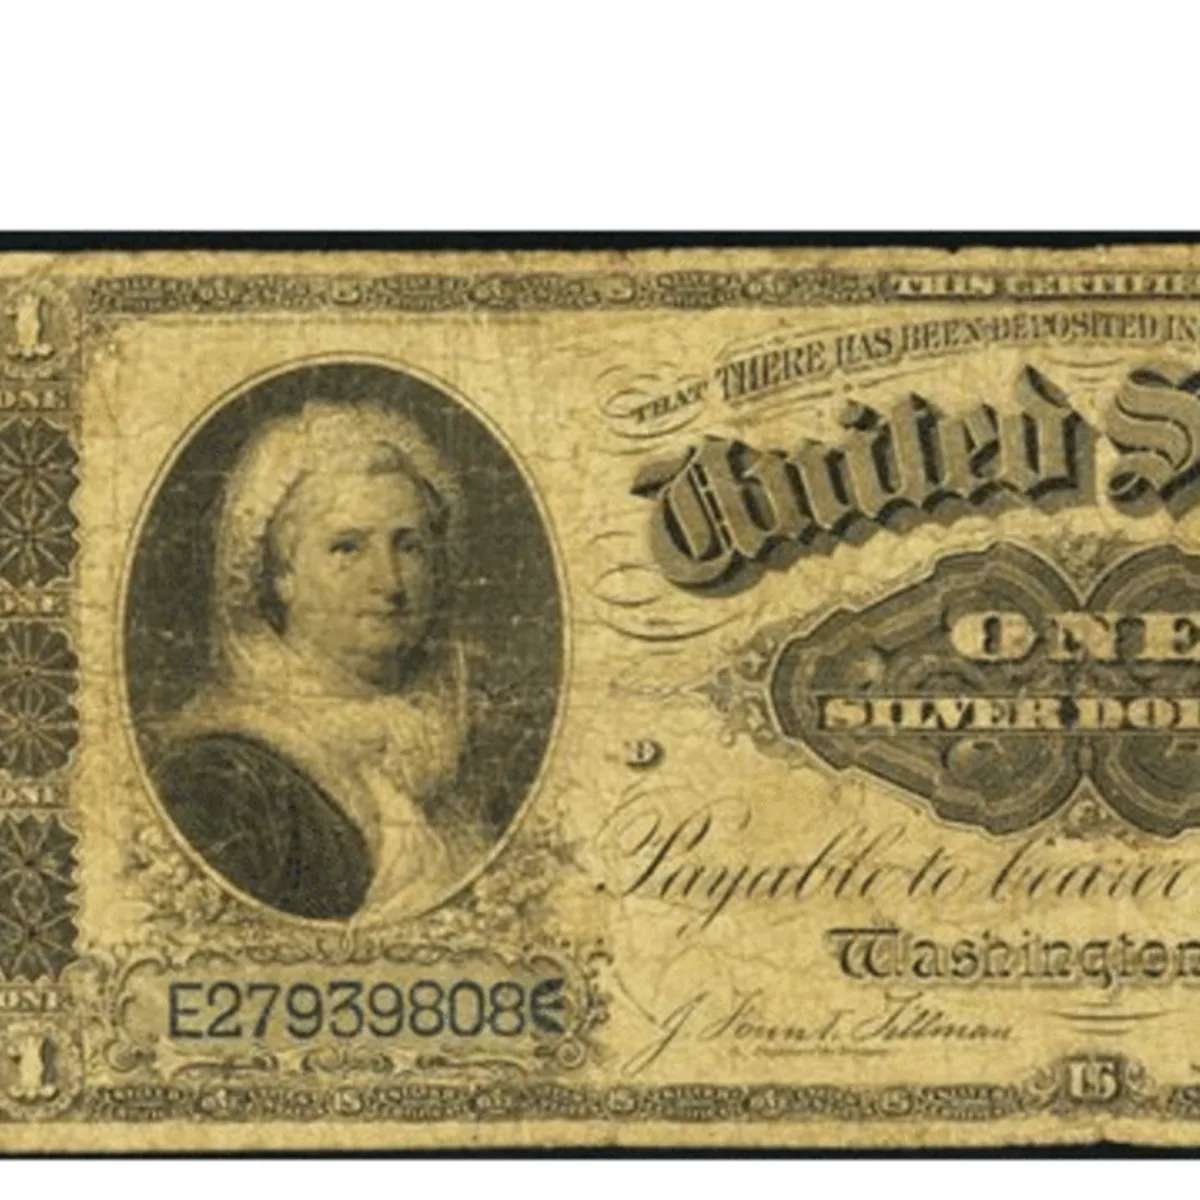 Martha Washington's portrait on the $1 Silver Certificate remains a singular honor in U.S. history.